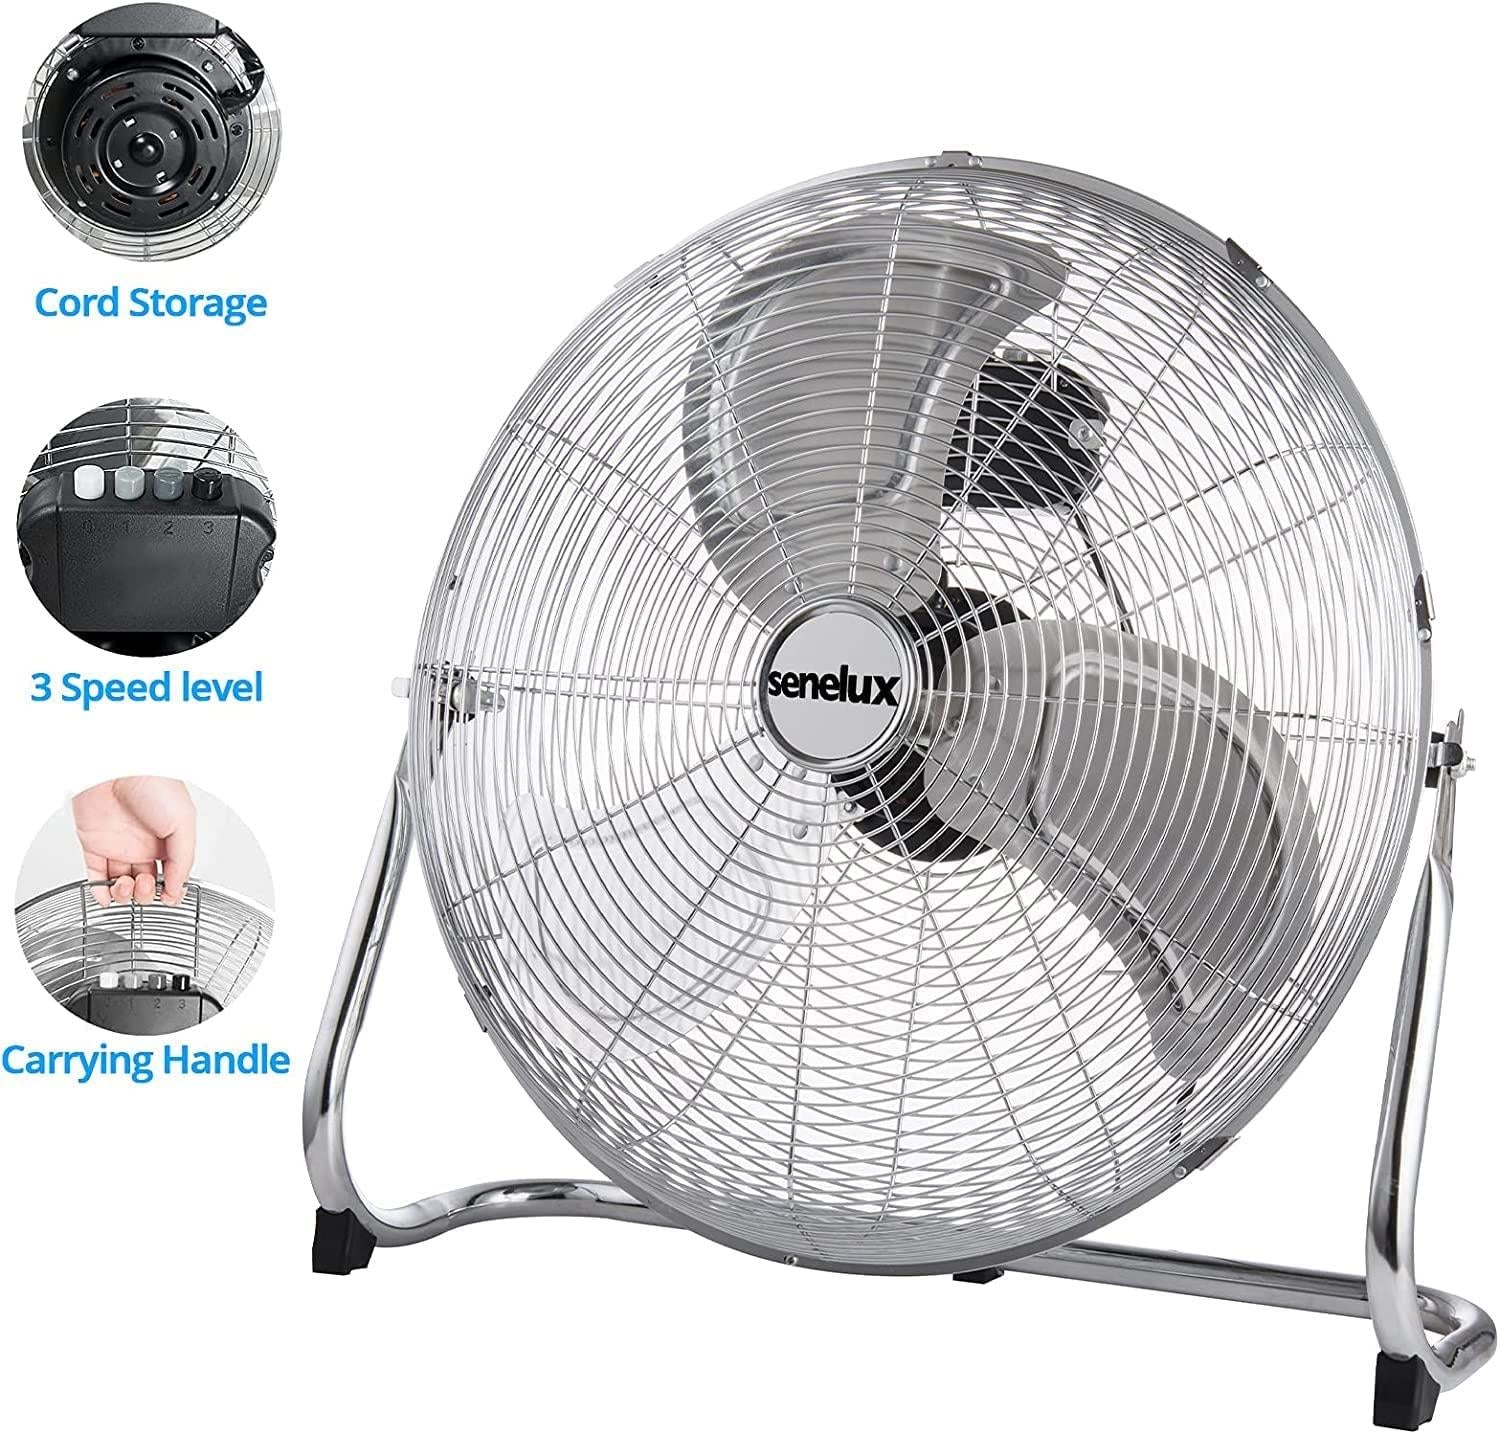 An image that shows the Chrome Floor Fan and three side pictures showing a carrying handle, controllable speeds and cord storage